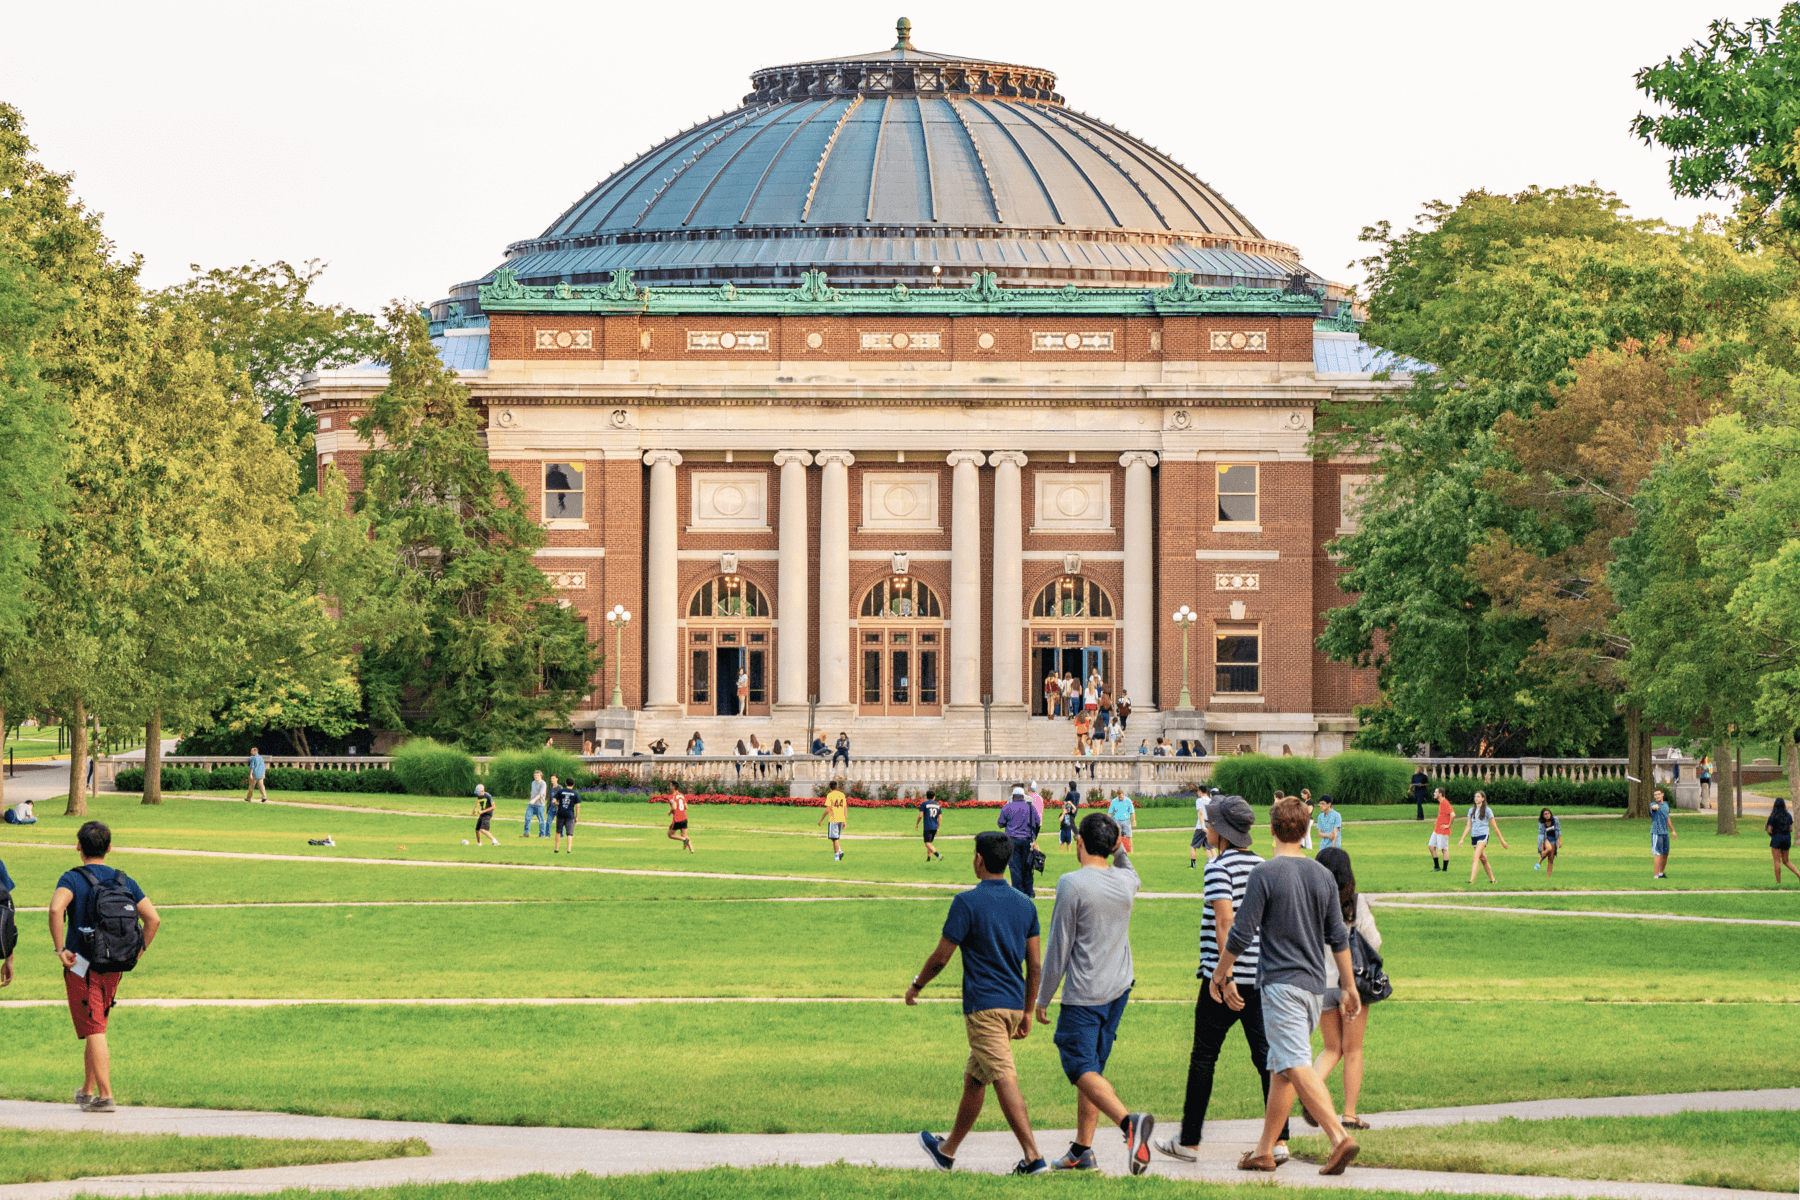 Students walk across a green lawn in front of a domed brick building on a college campus.